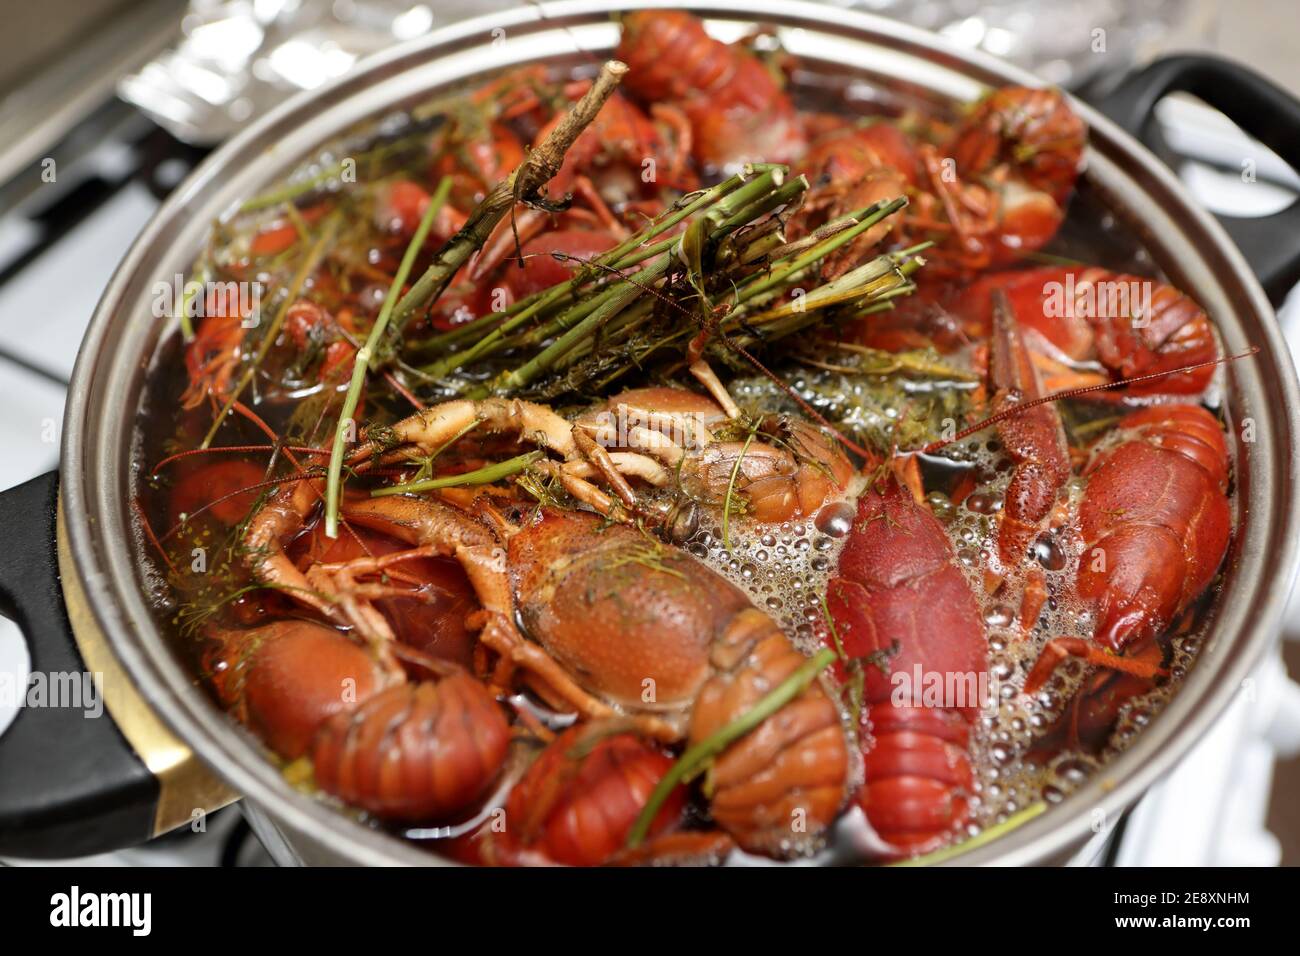 Cooking of crayfish with herb at a kitchen Stock Photo